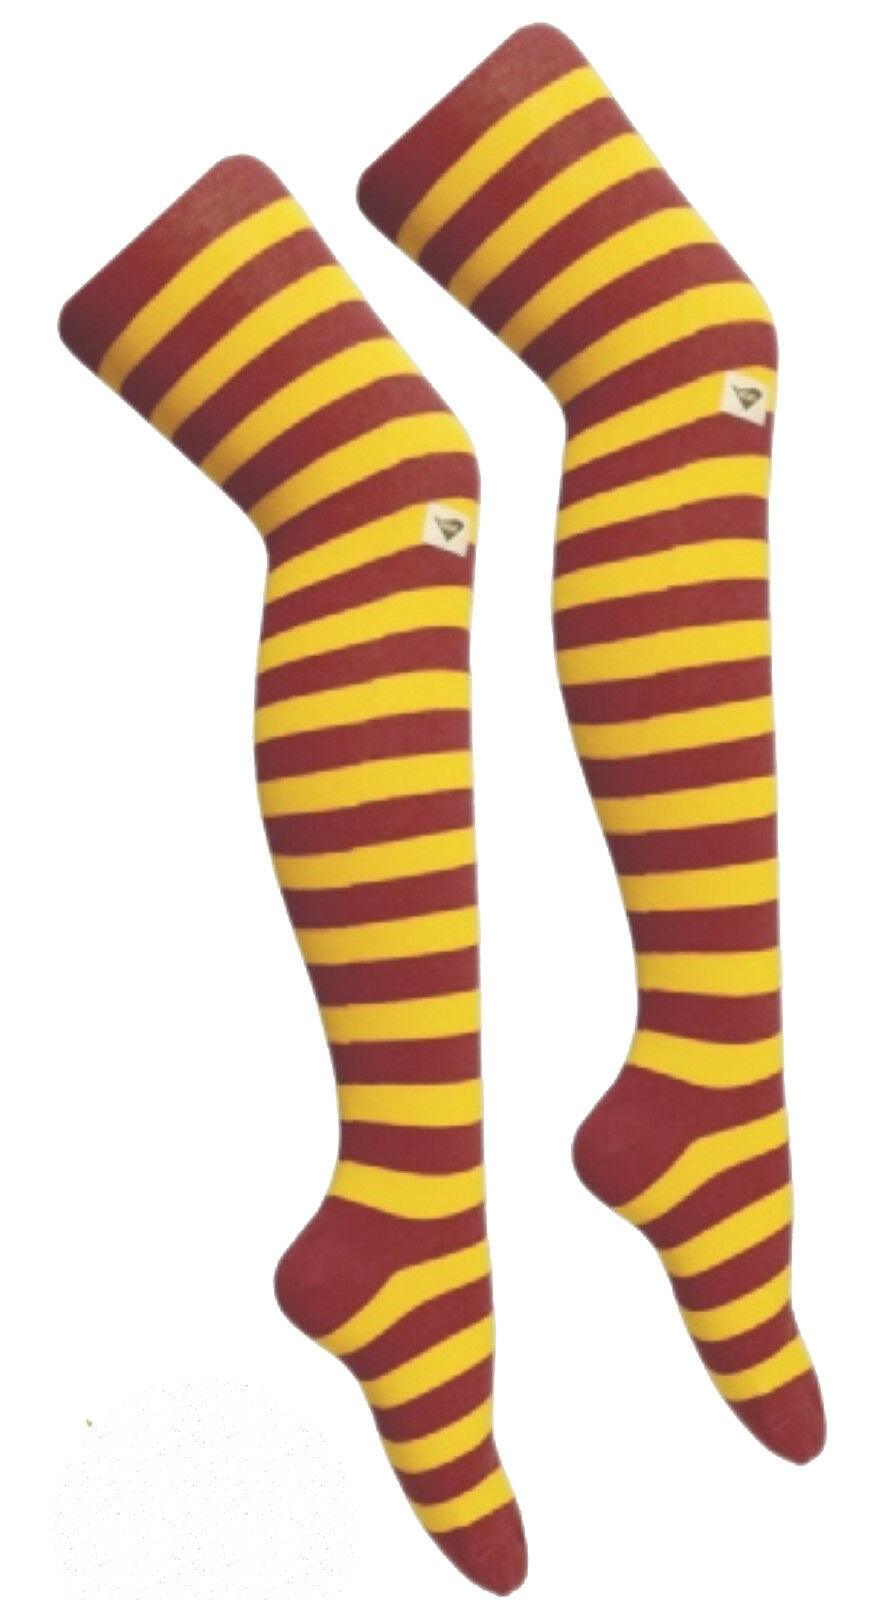 Ladies Maroon & Yellow Thigh High Girls Stretchy Over the Knee Socks - Labreeze